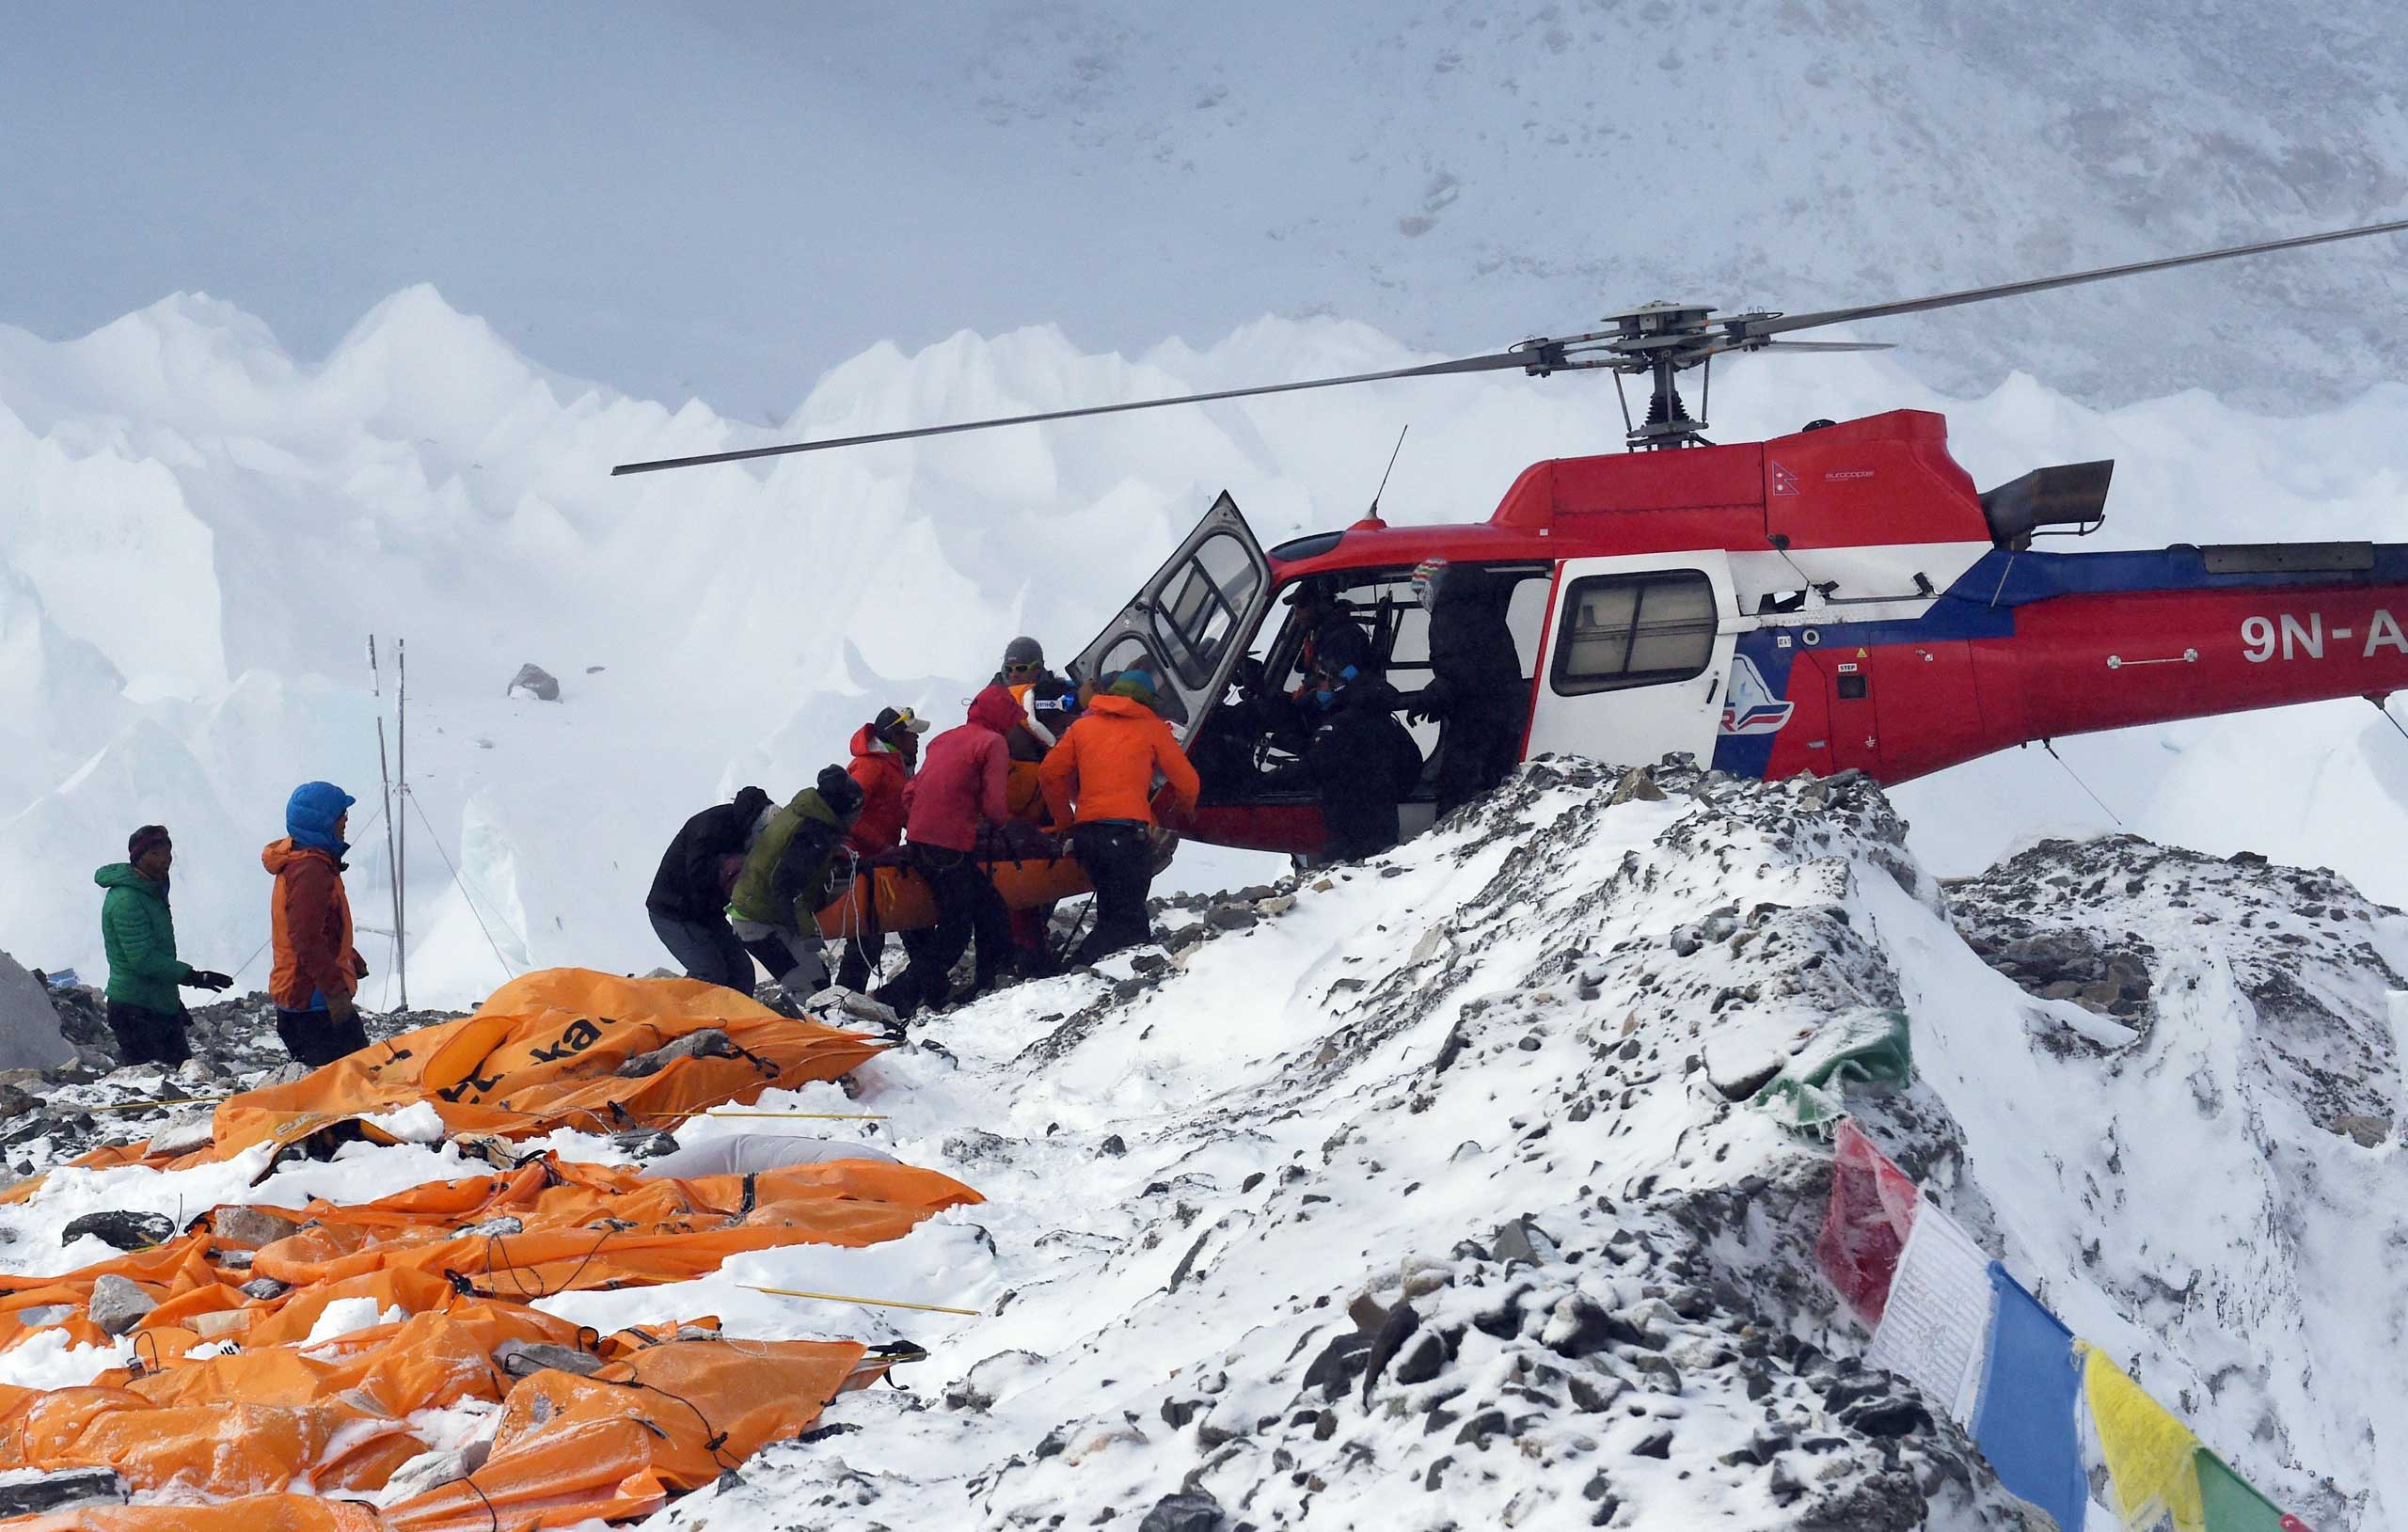 An injured person is loaded onto a rescue helicopter at Everest Base Camp on April 26, 2015. (Roberto Schmidt—AFP/Getty Images)